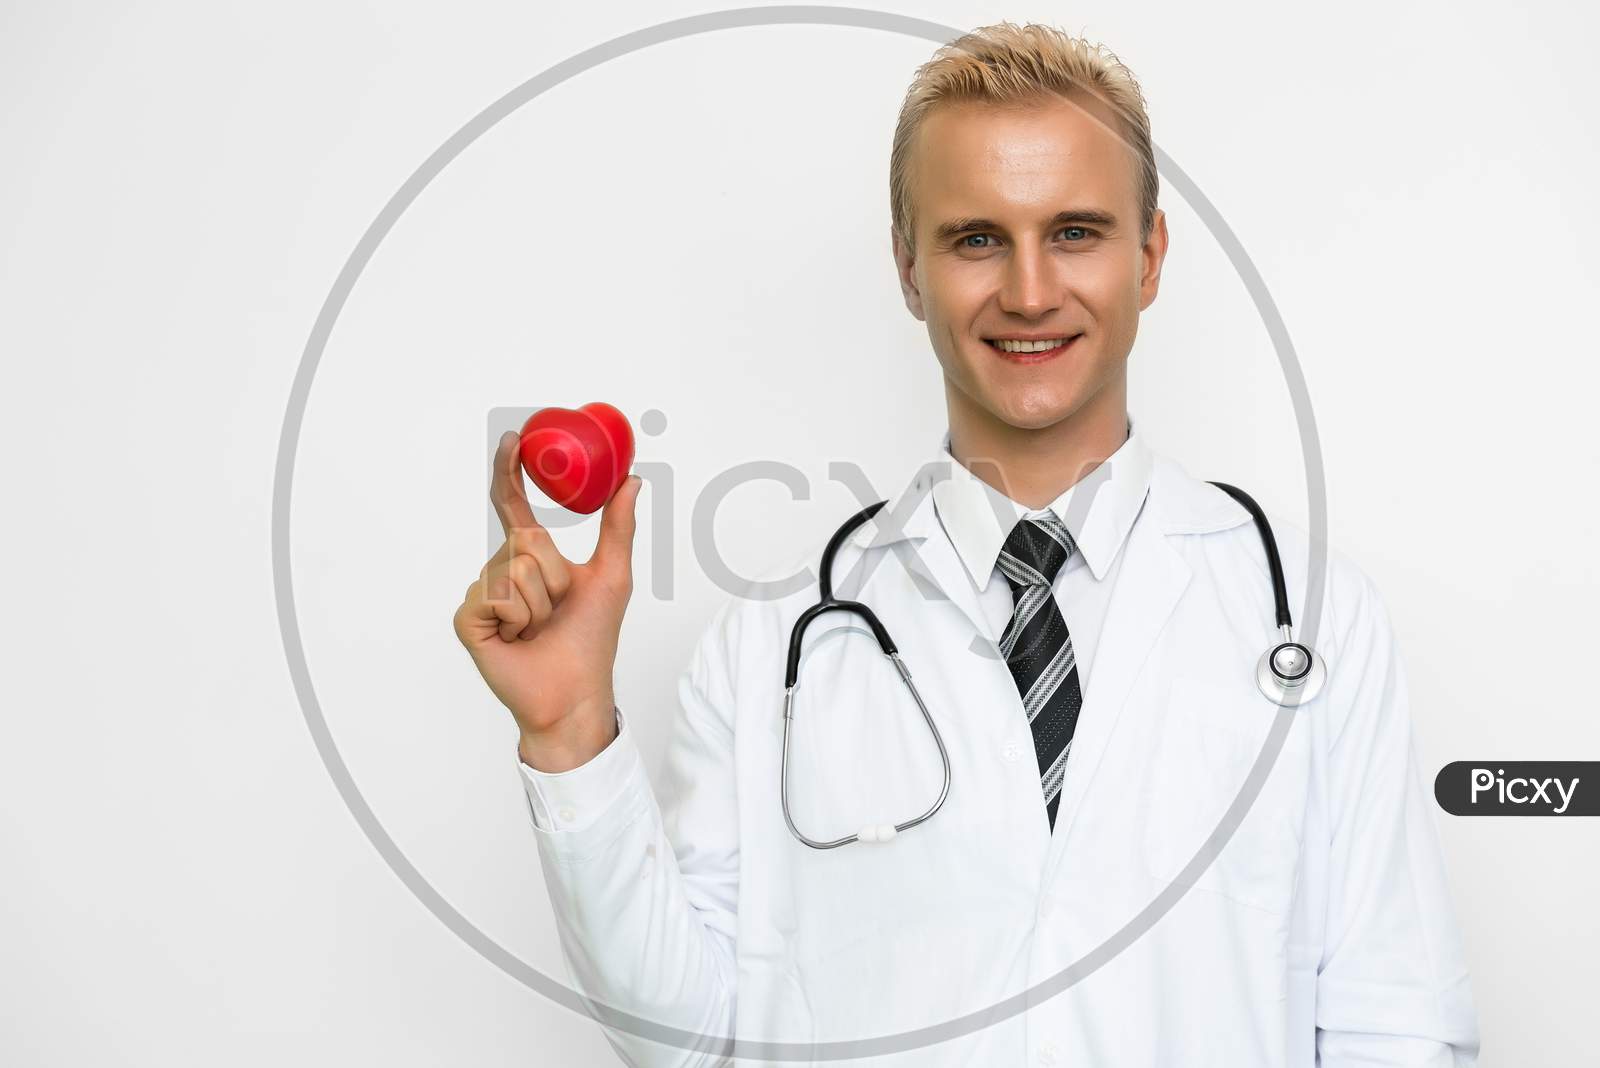 Handsome Male Doctor Holding Red Heart And Smiling. Healthcare And Medical Concept. Happiness People And Lifestyle Theme.